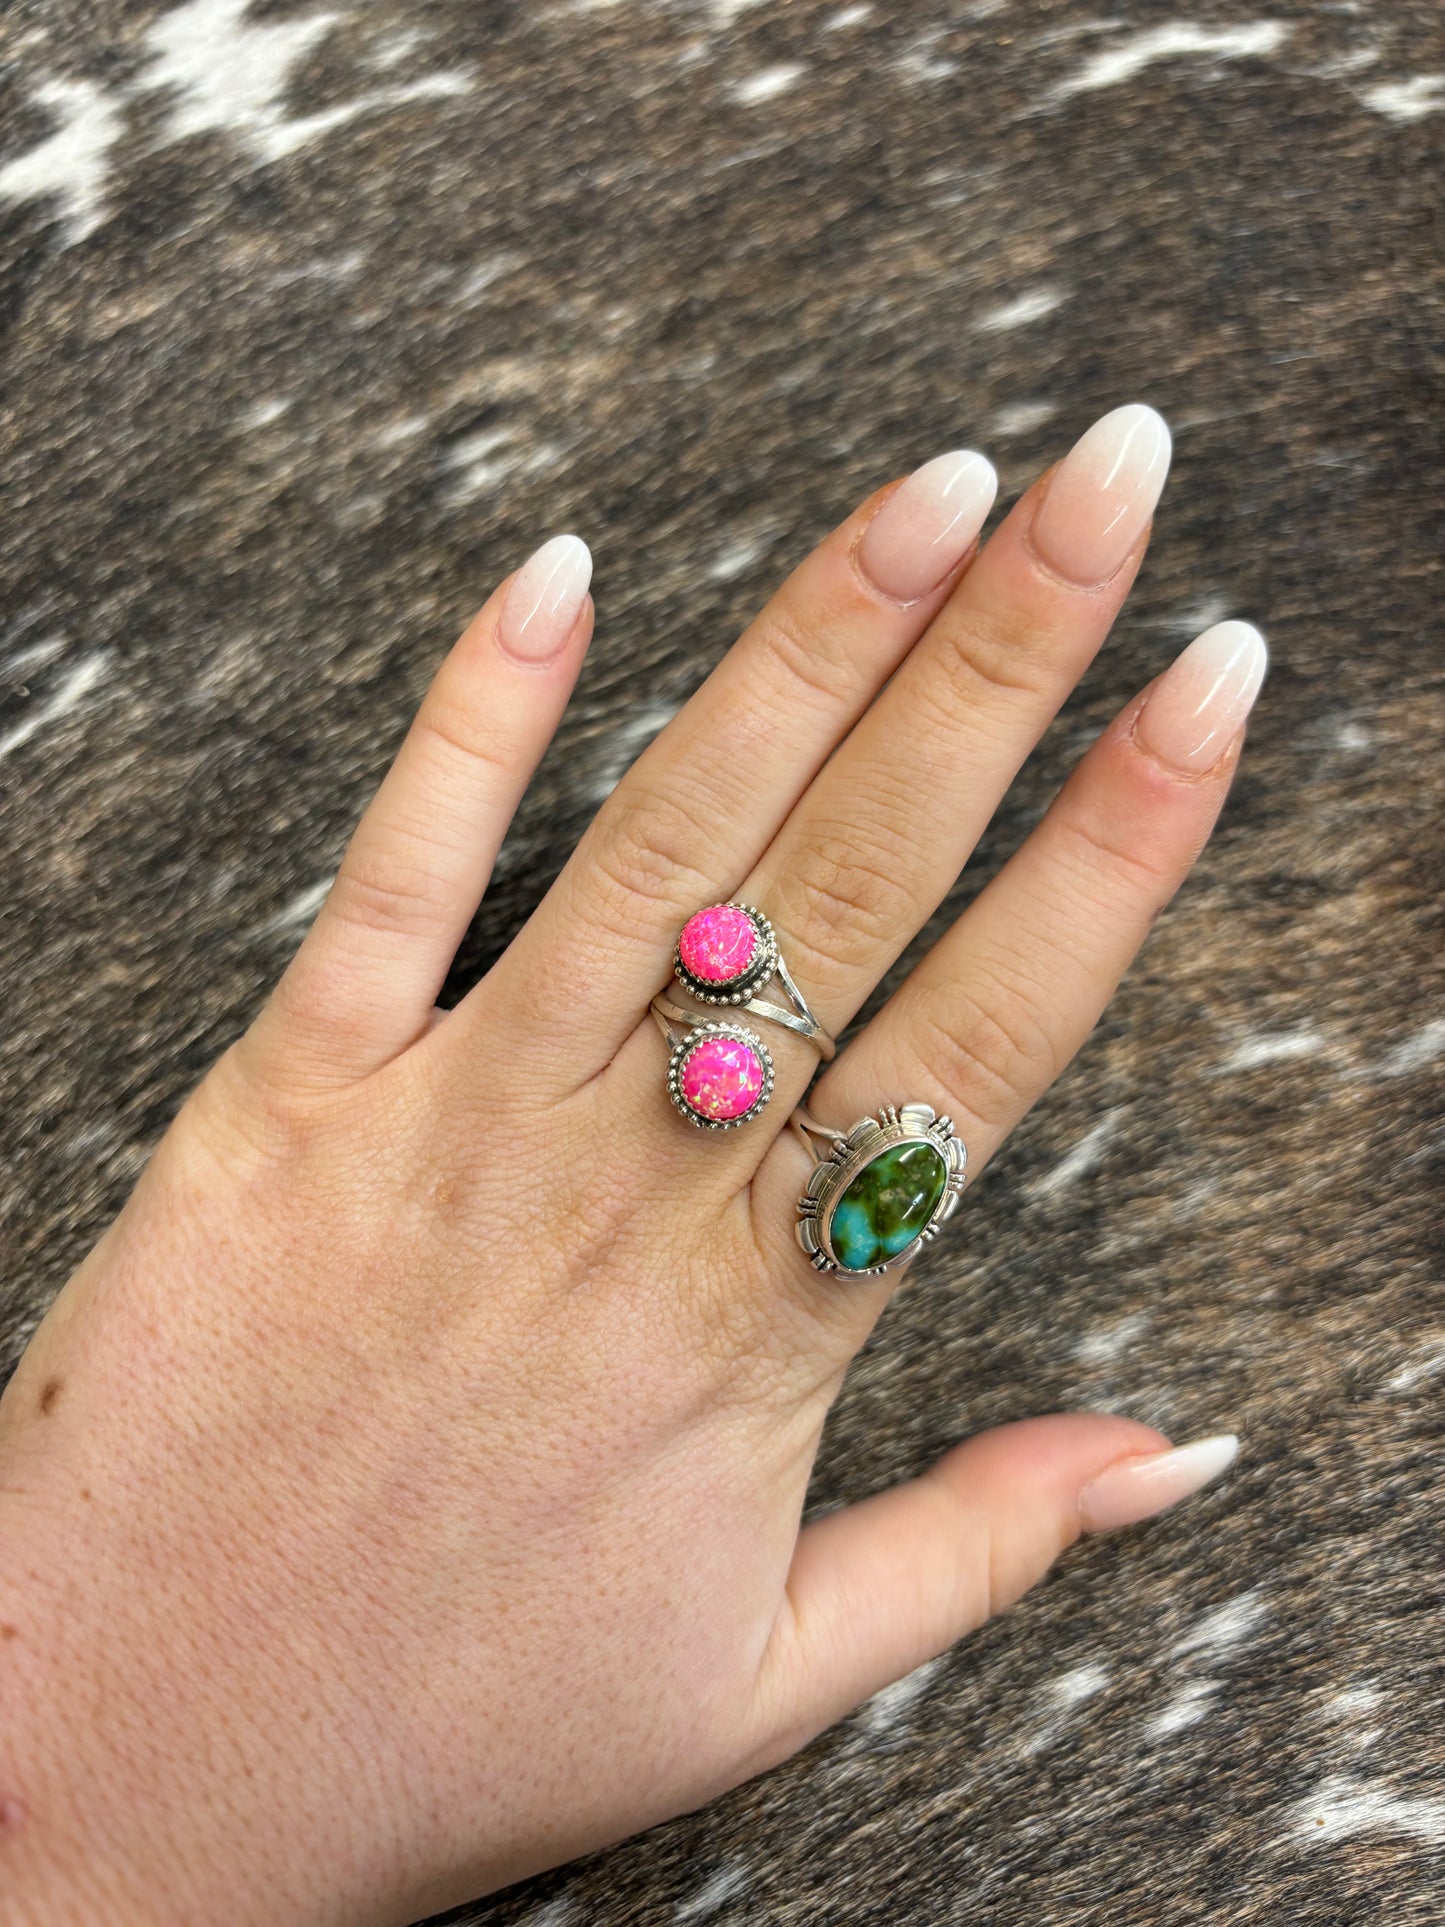 The Dolly Pink Opal Wrap Ring - size 8.5